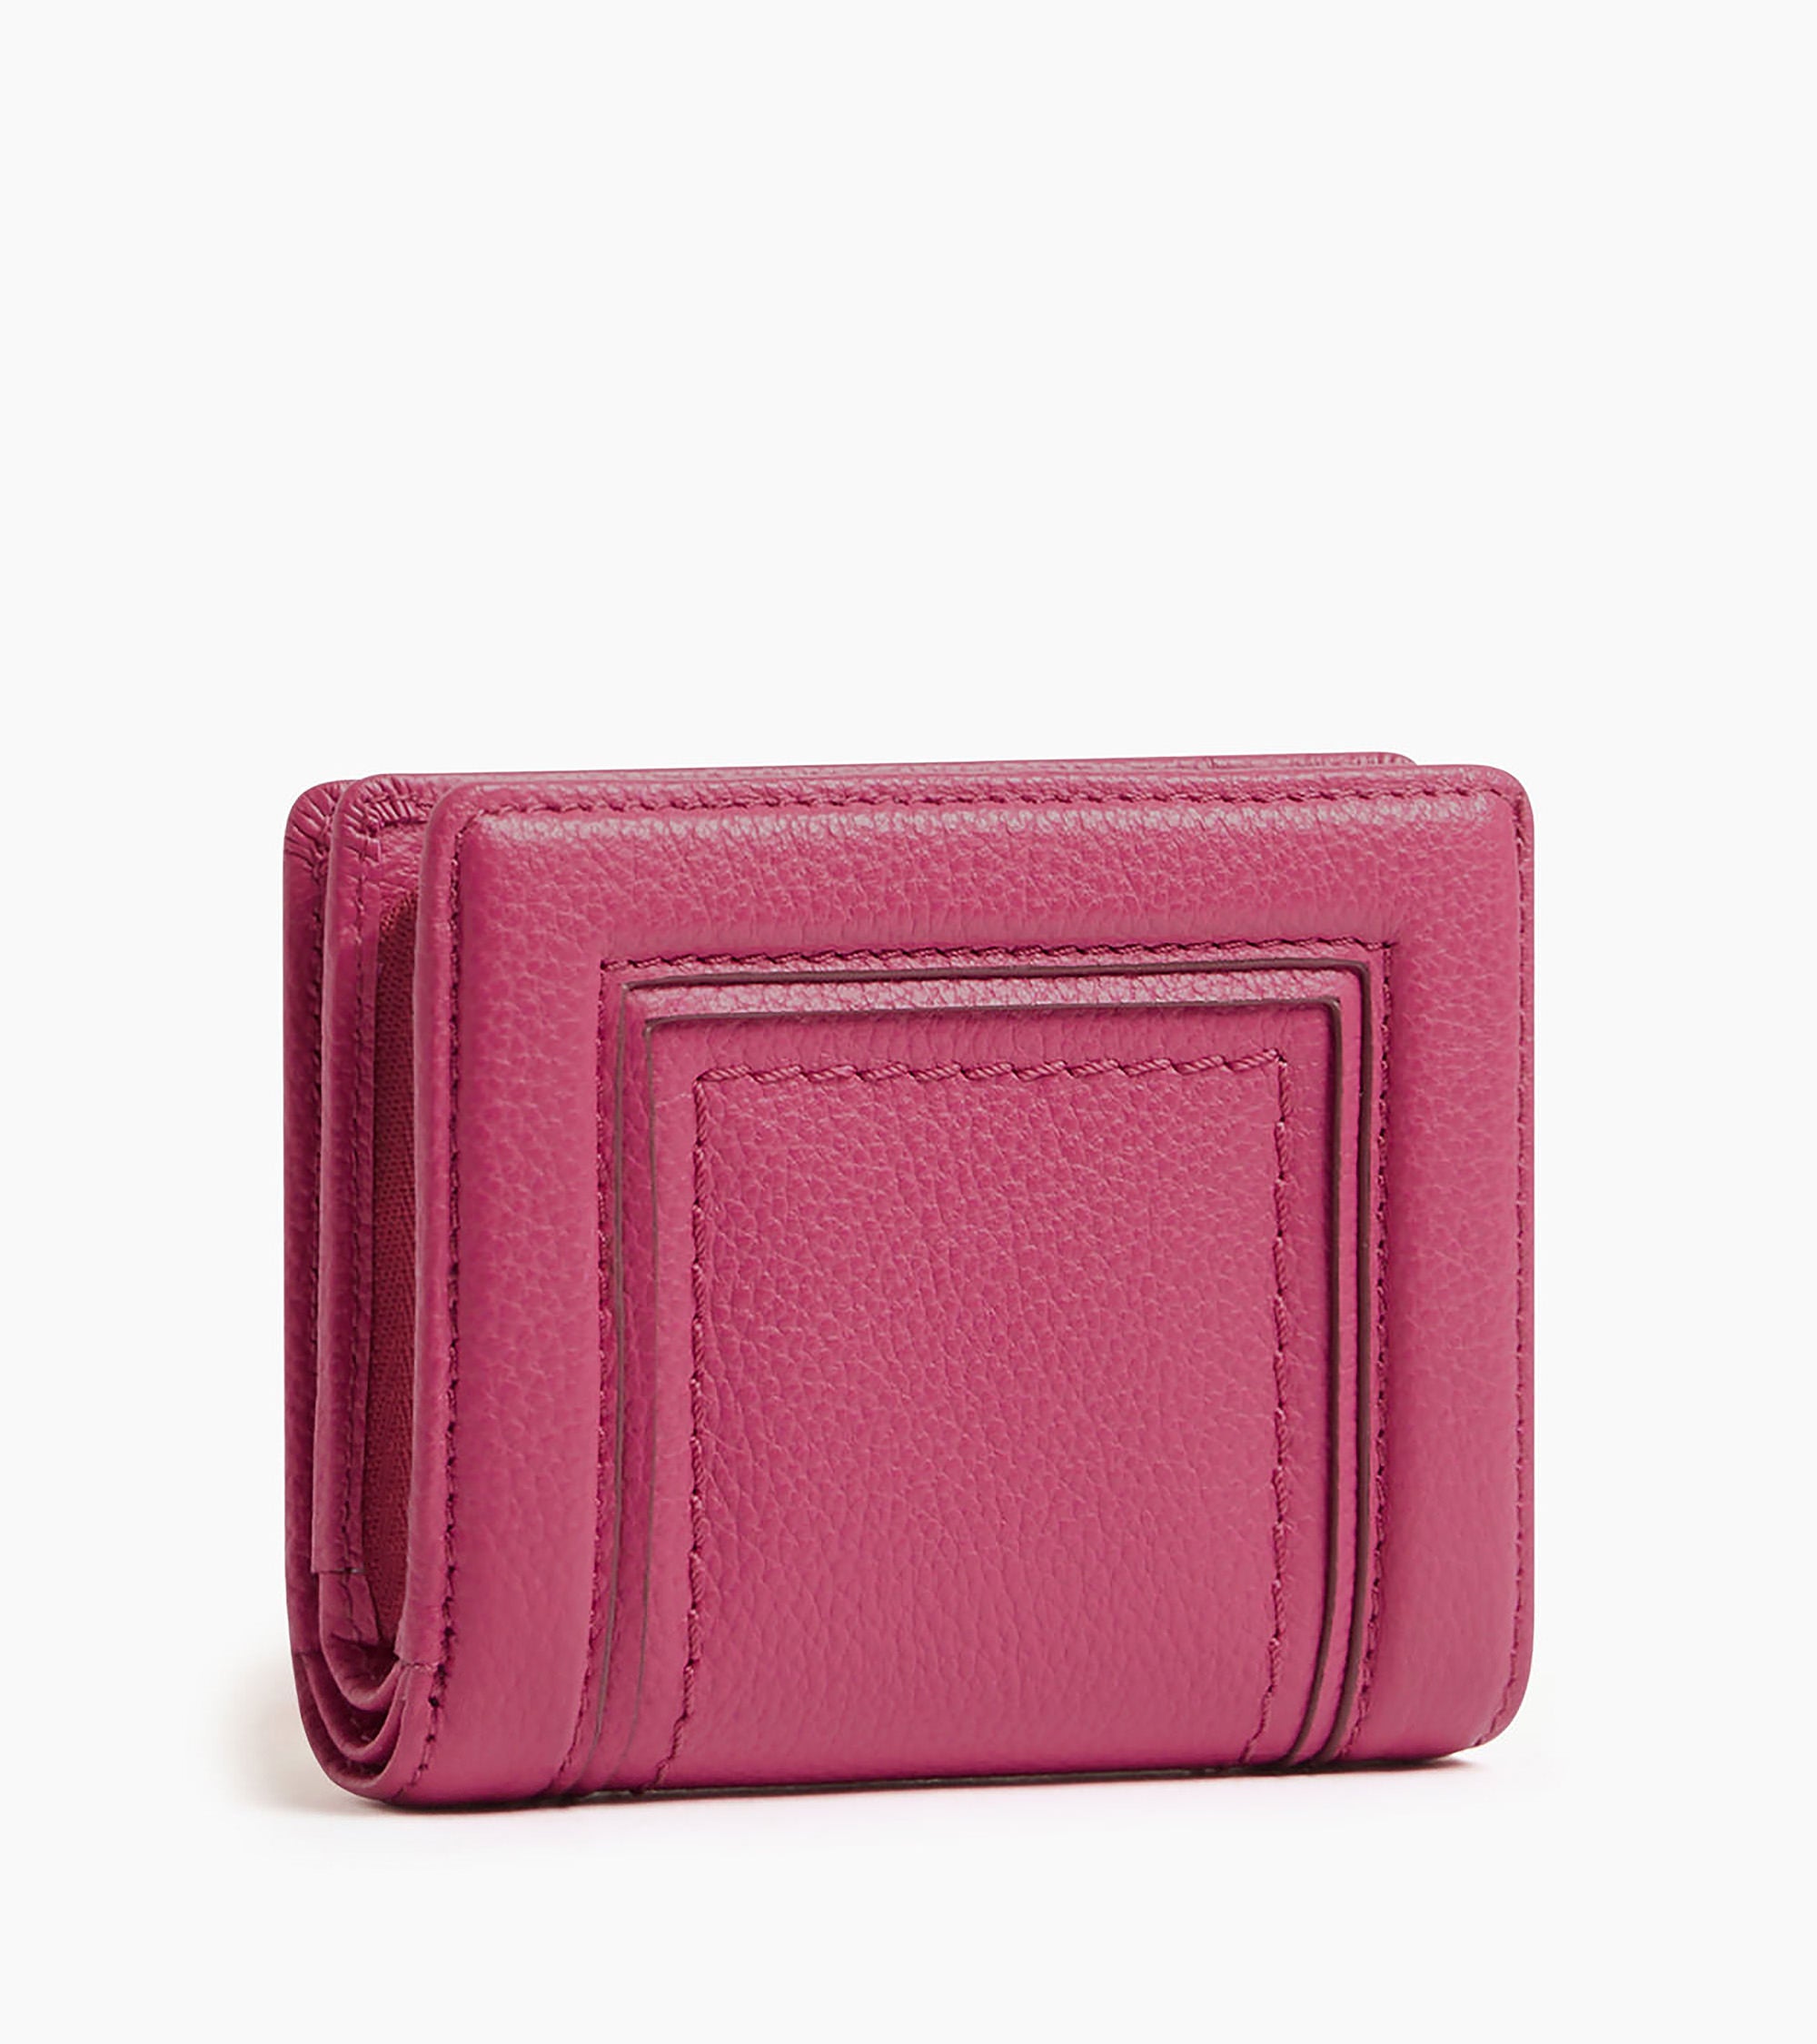 Ella small wallet in grained leather